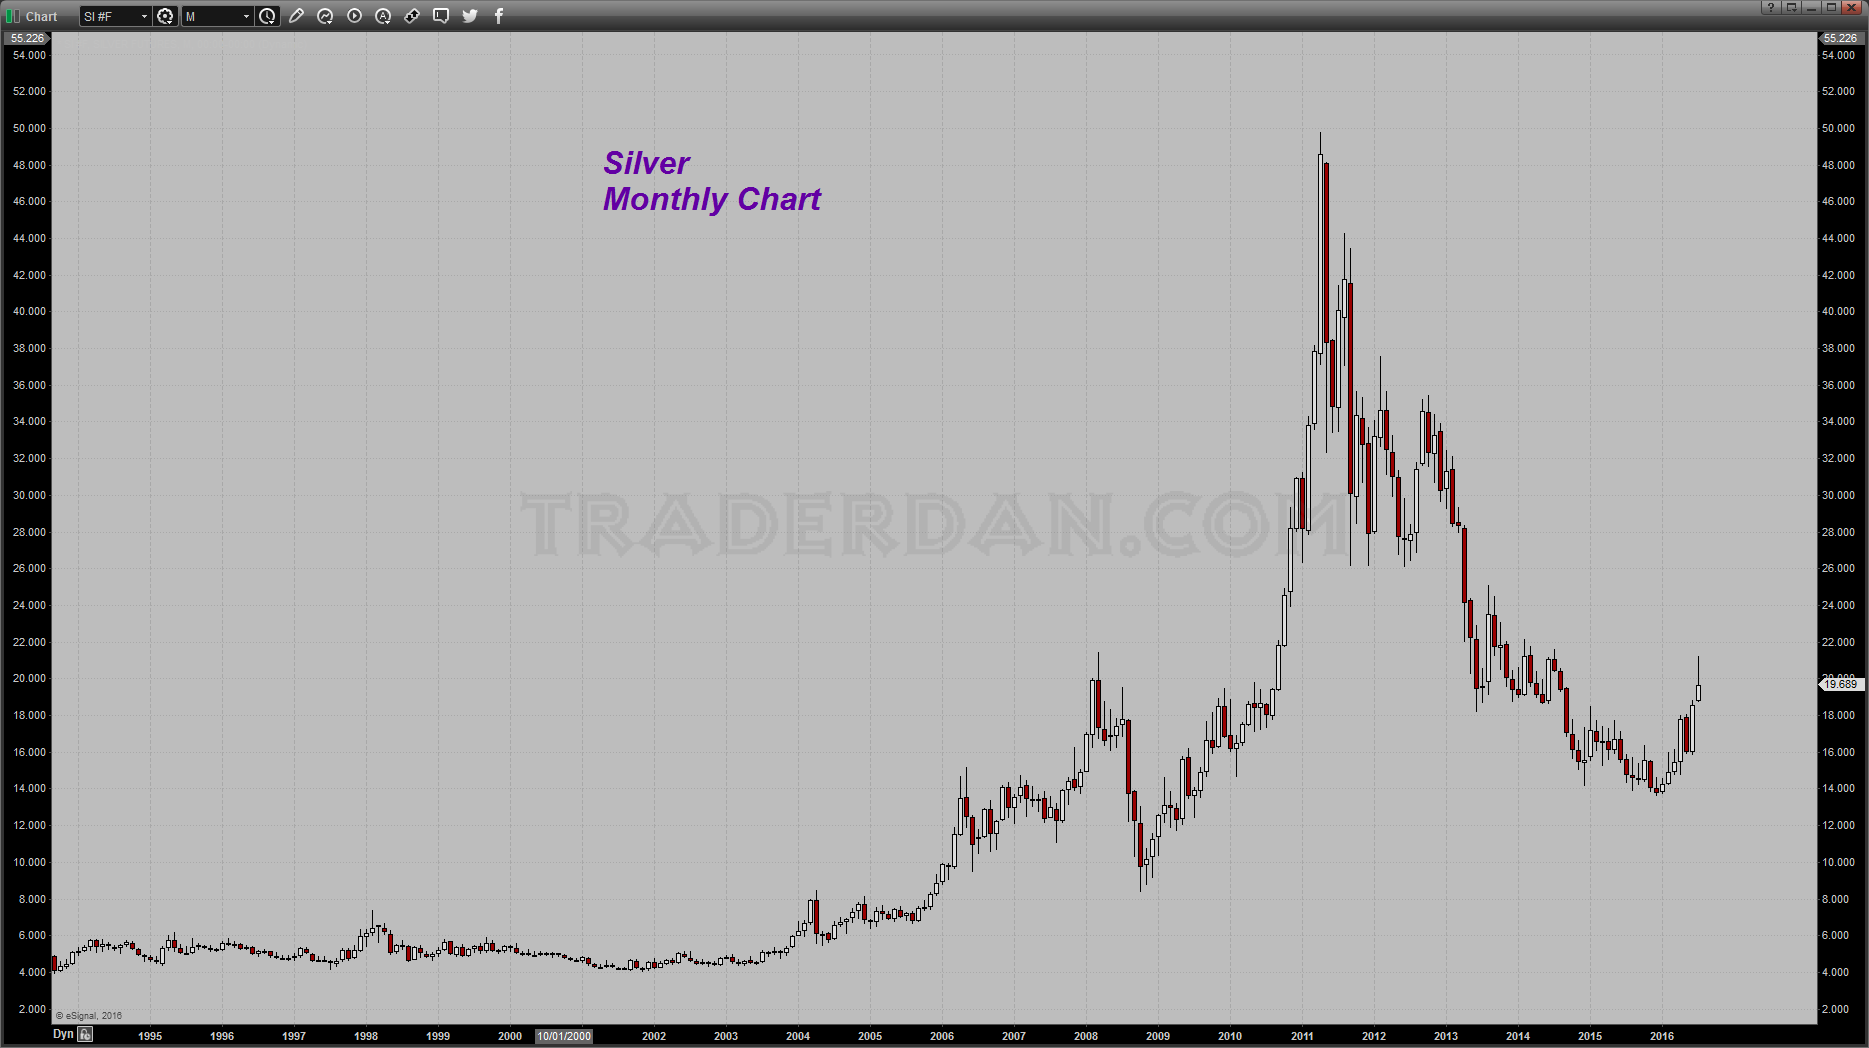 Silver Monthly 1993-2016